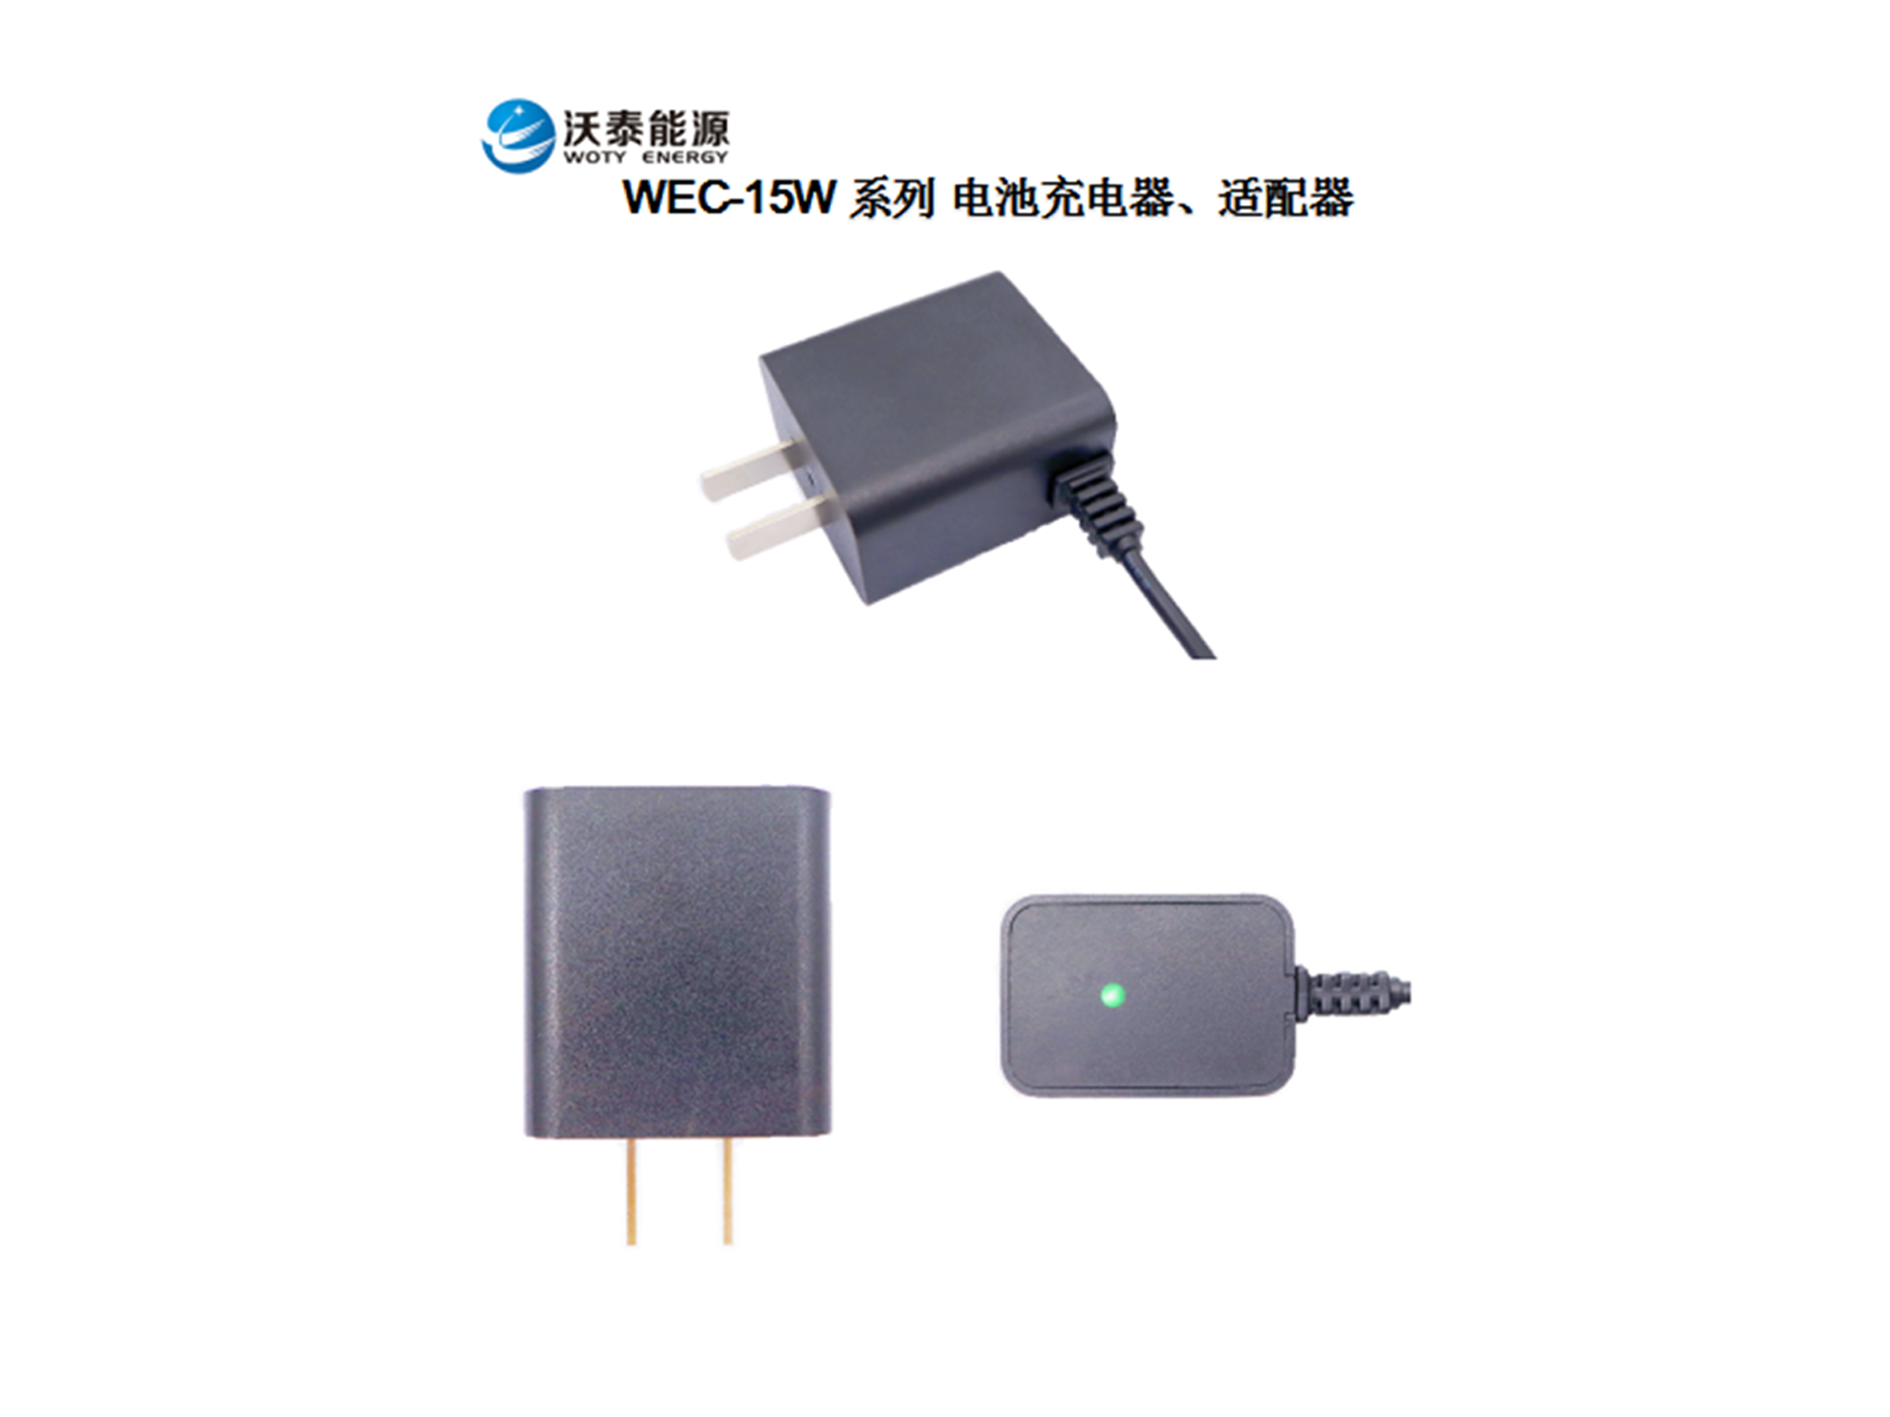 WEC-15W series, battery charger, power supply